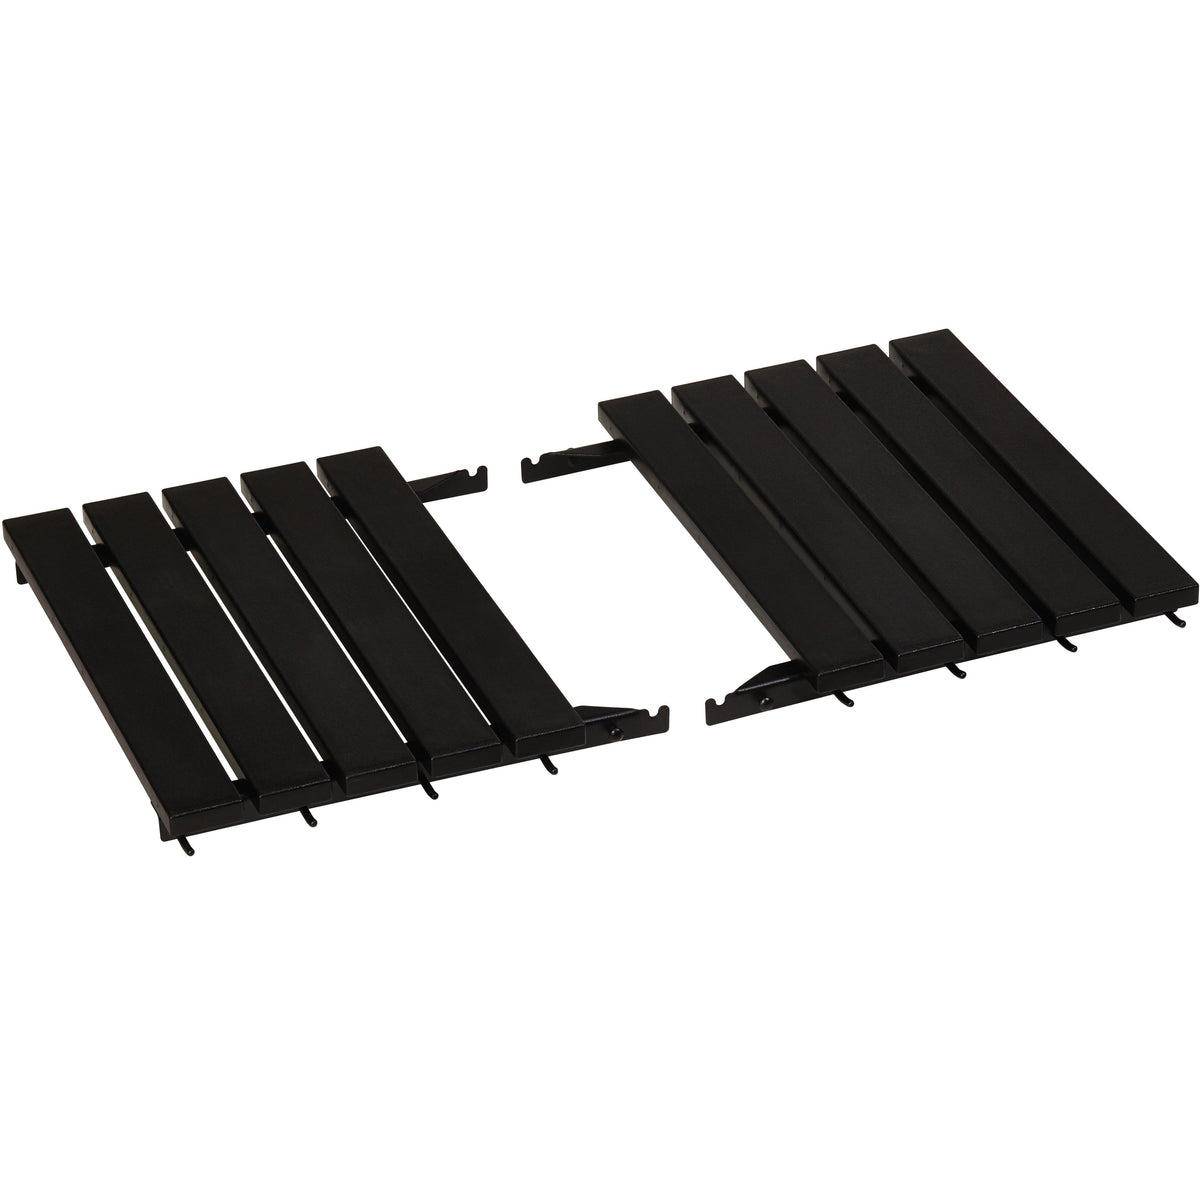 Grill and Oven Accessories Shelves BJ-BSS24H IMAGE 1